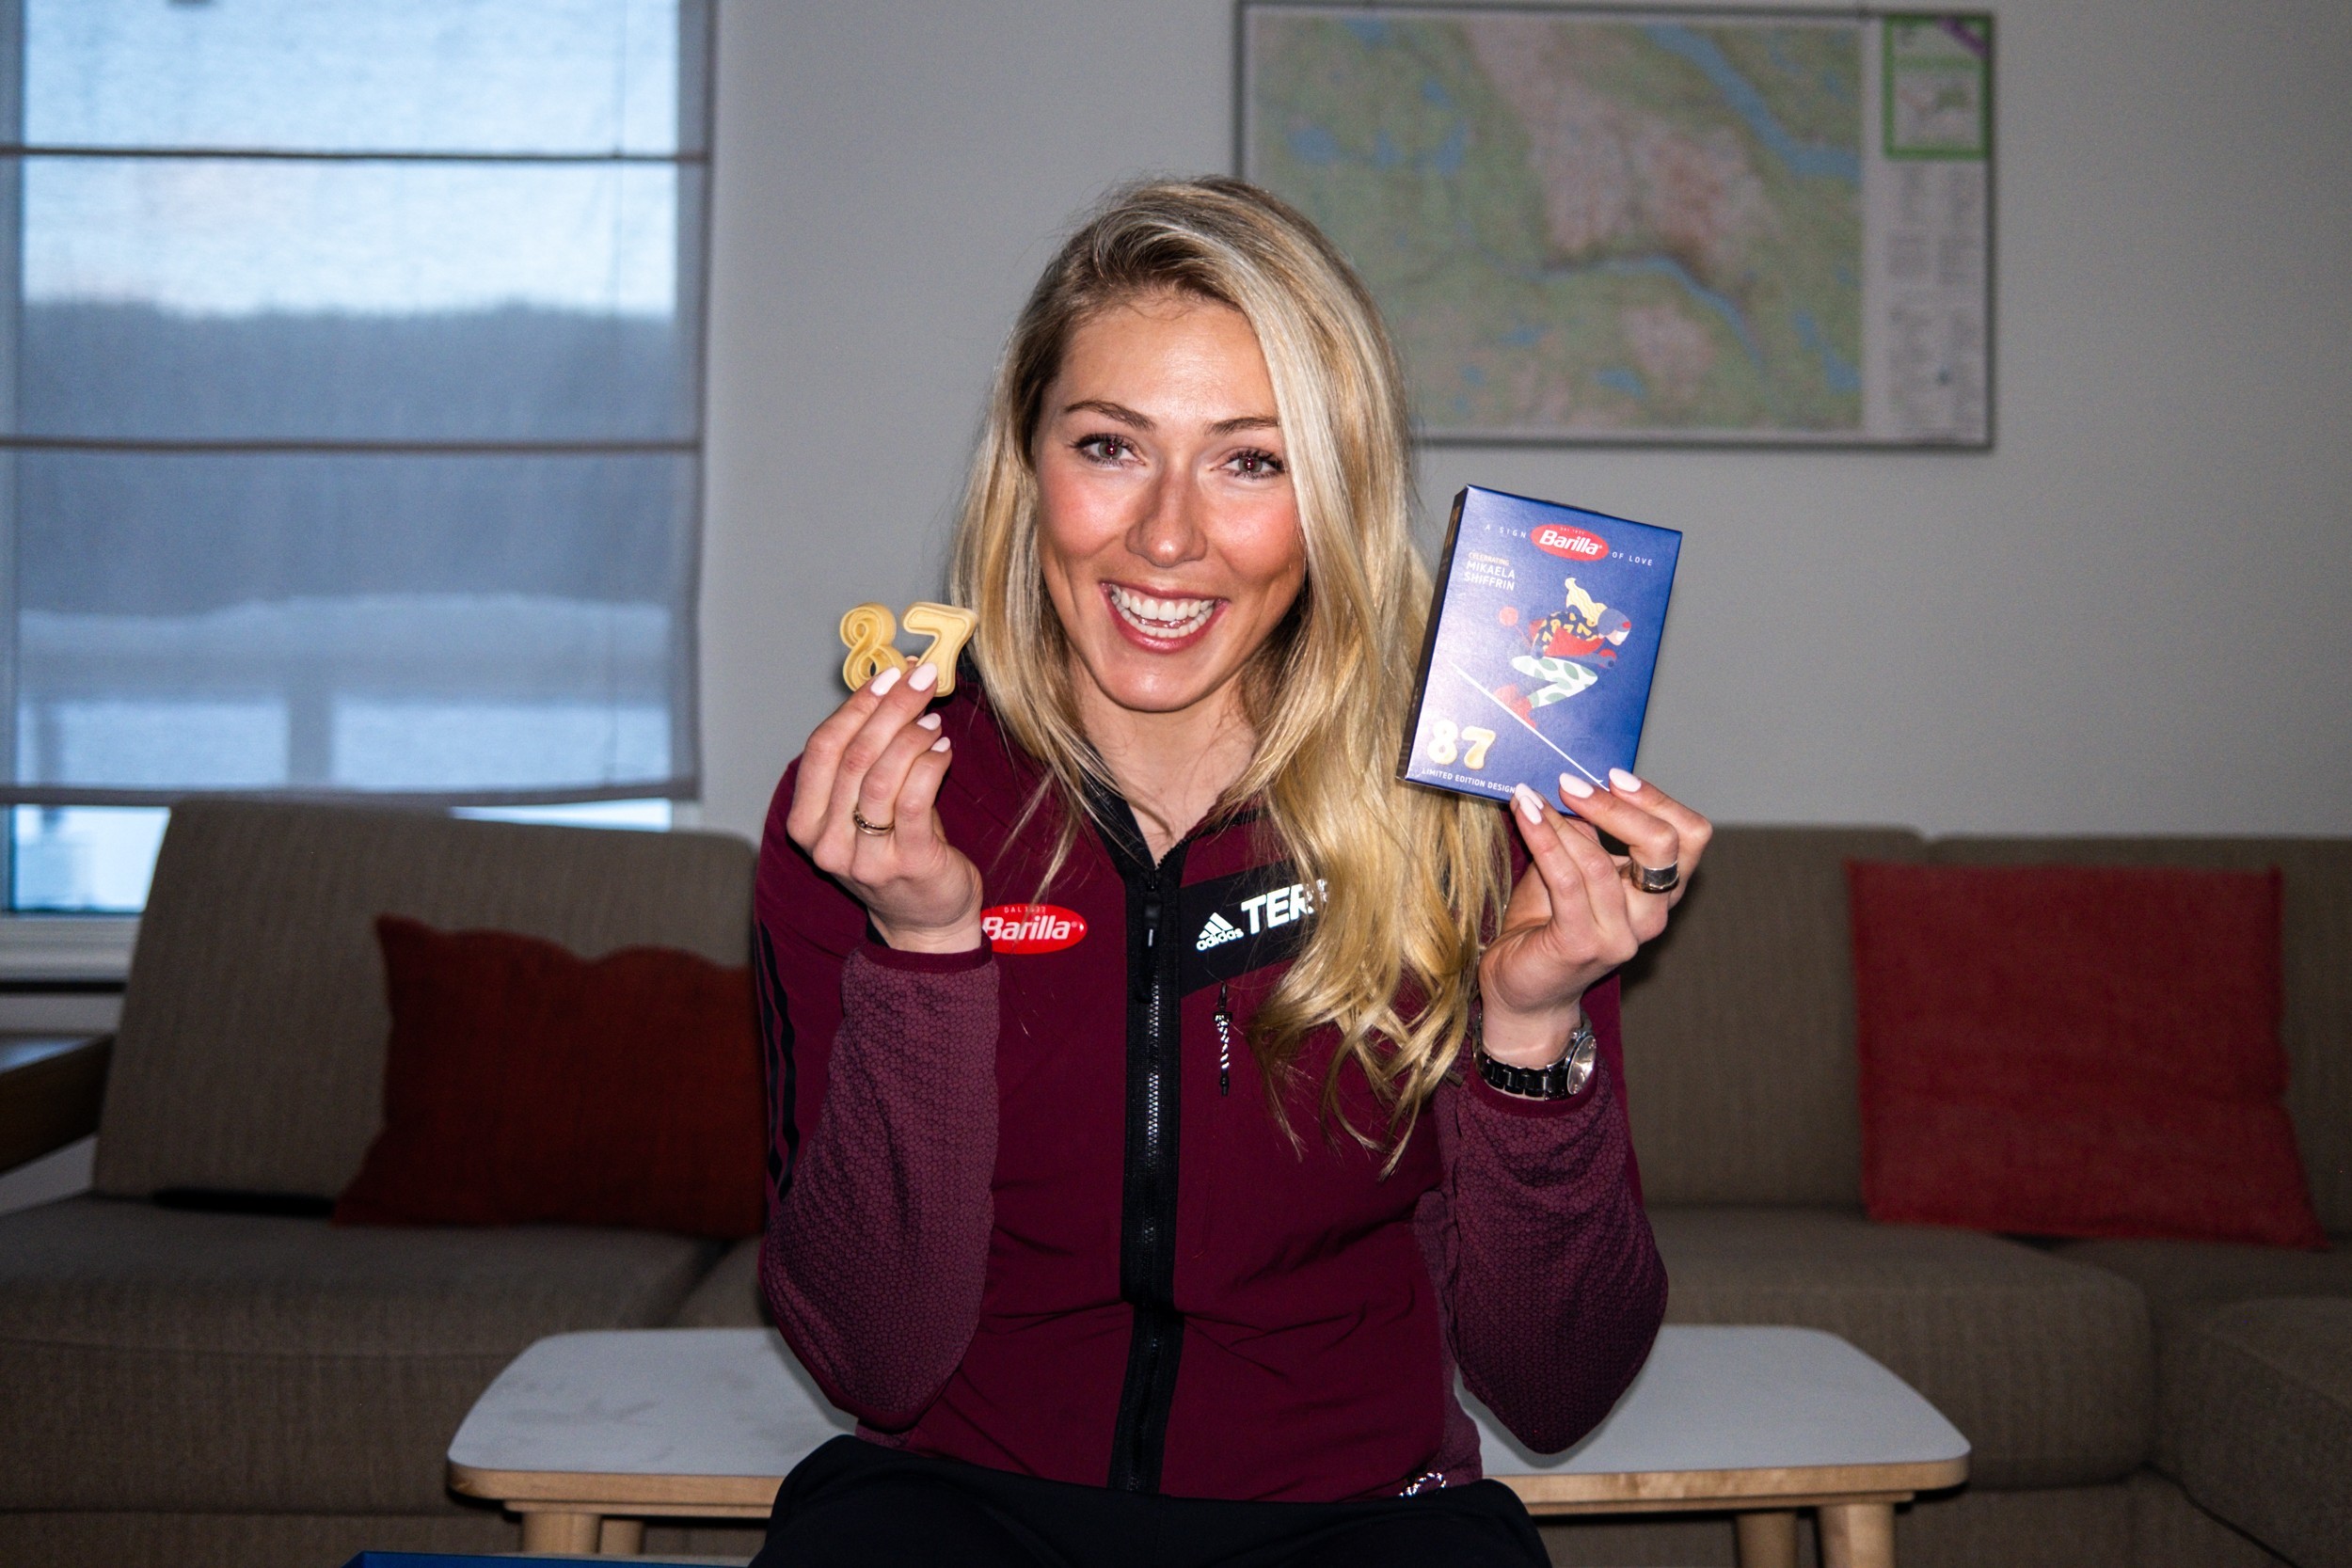 Barilla & Mikaela Shiffrin: Greatness starts with a great recipe - Pack No. 36